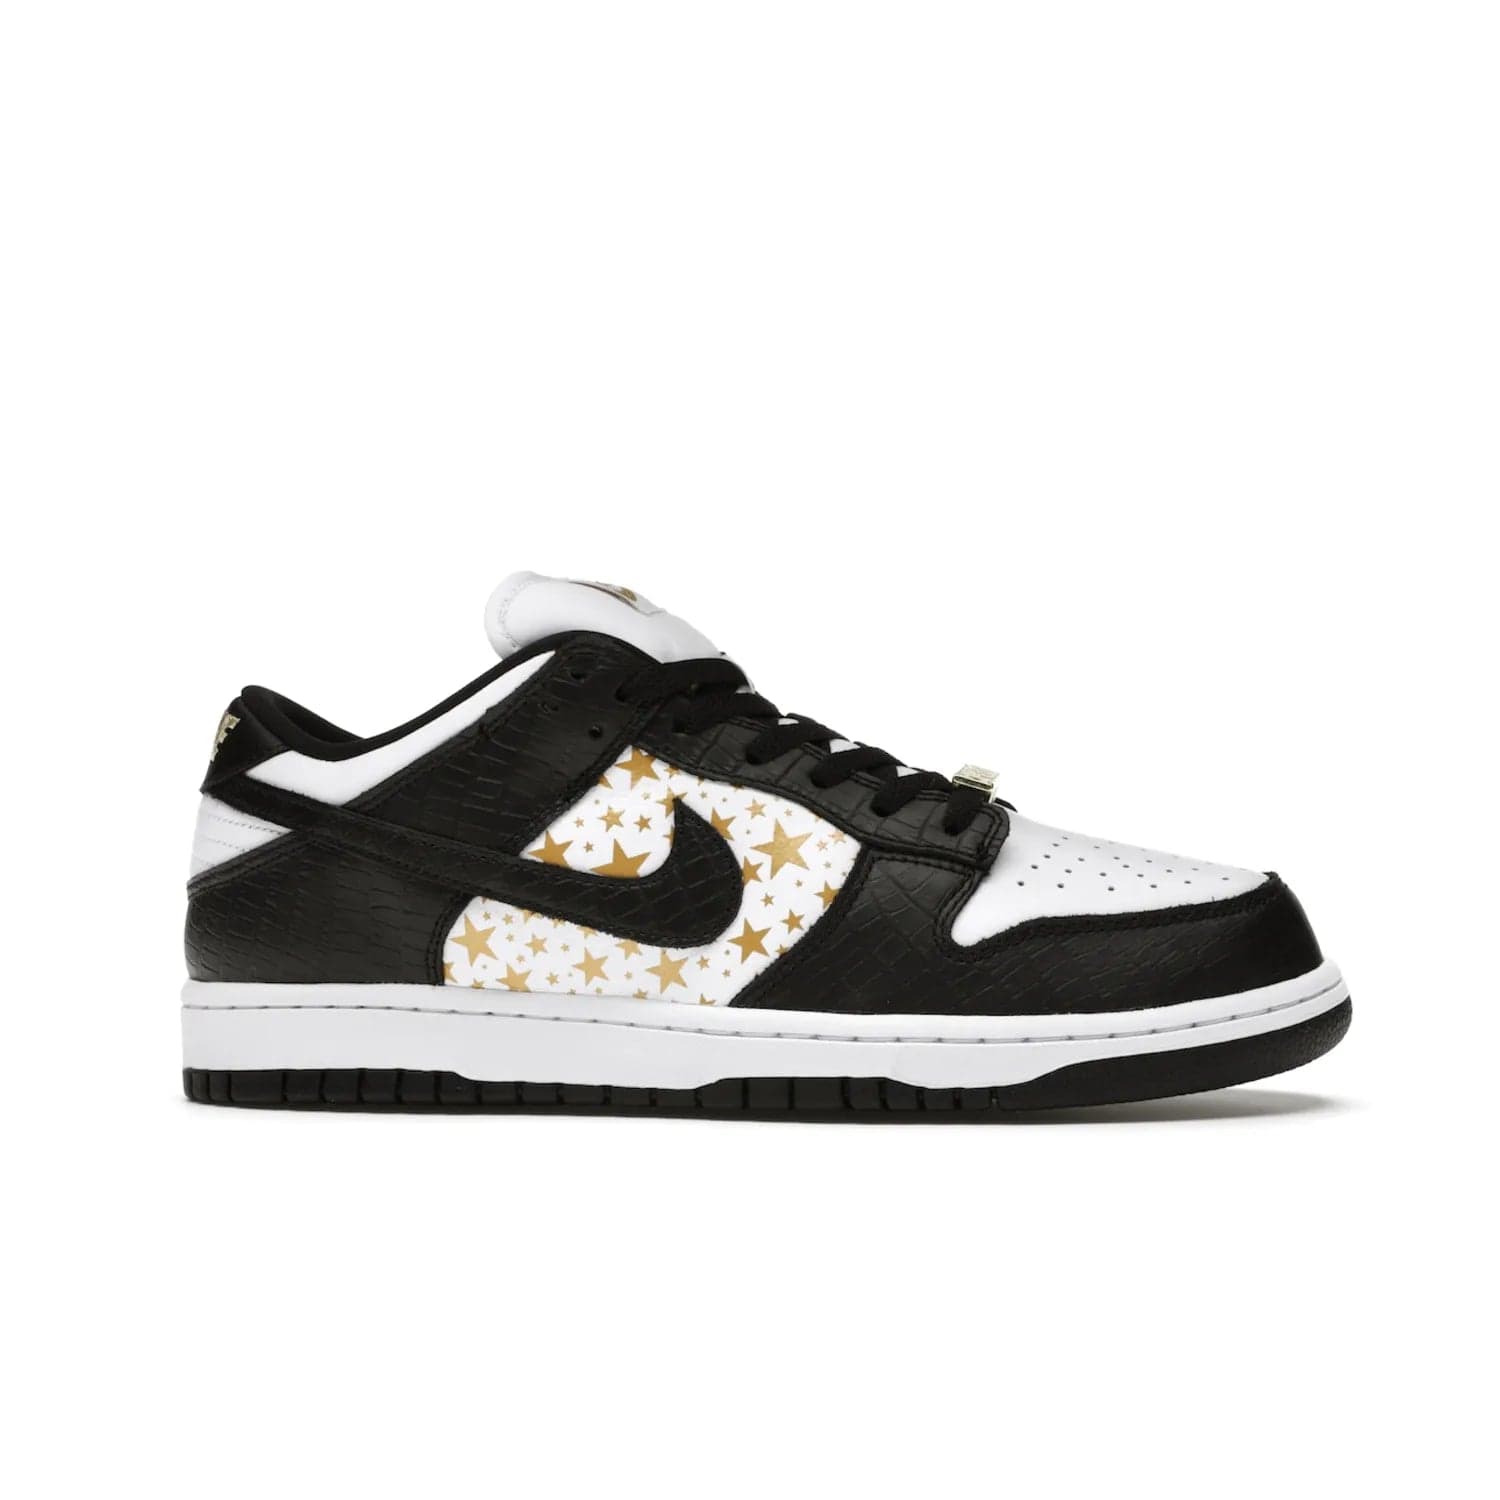 Nike SB Dunk Low Supreme Stars Black (2021) - Image 2 - Only at www.BallersClubKickz.com - Retro style and signature details make the Nike SB Dunk Low Supreme Black a must-have. This special edition shoe features a white leather upper and black croc skin overlays complemented by gold stars and deubré. Enjoy a piece of SB history and grab yours today.